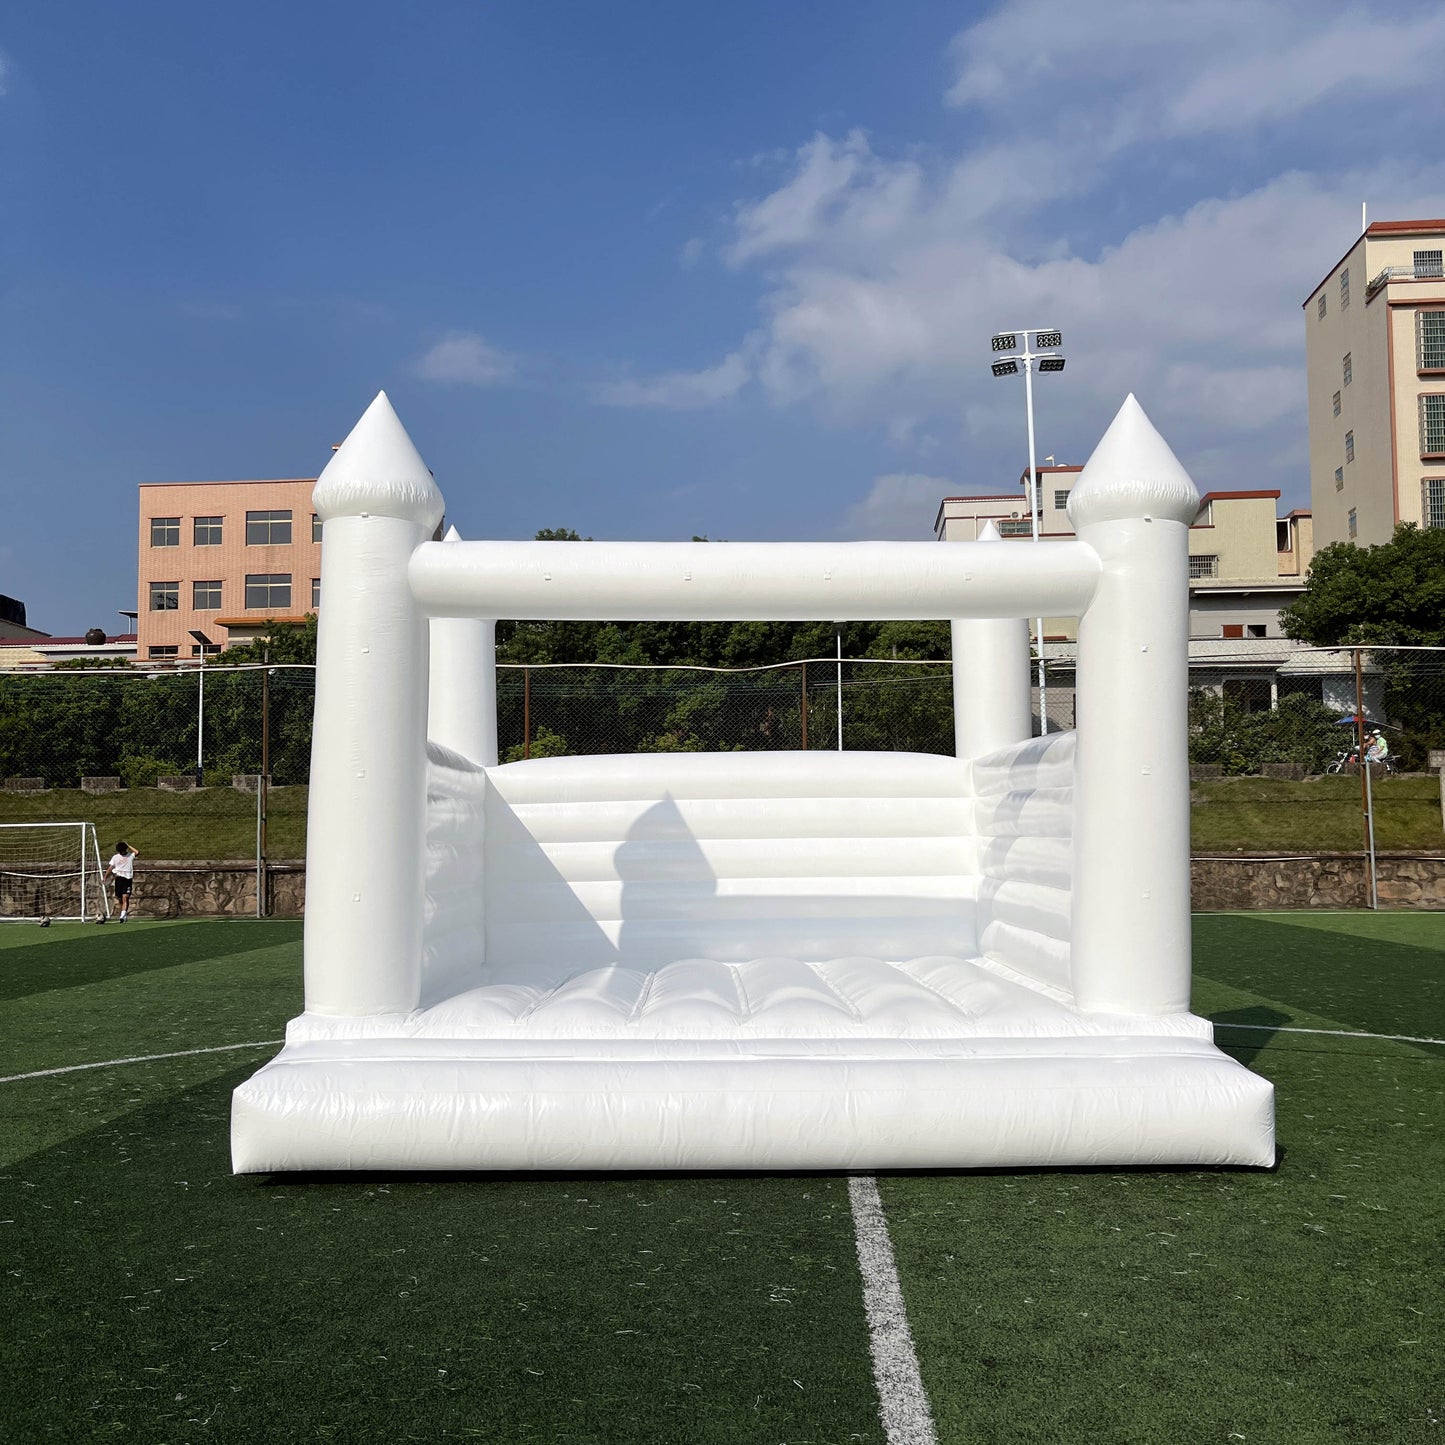 White Bounce House For Parties/baby shower